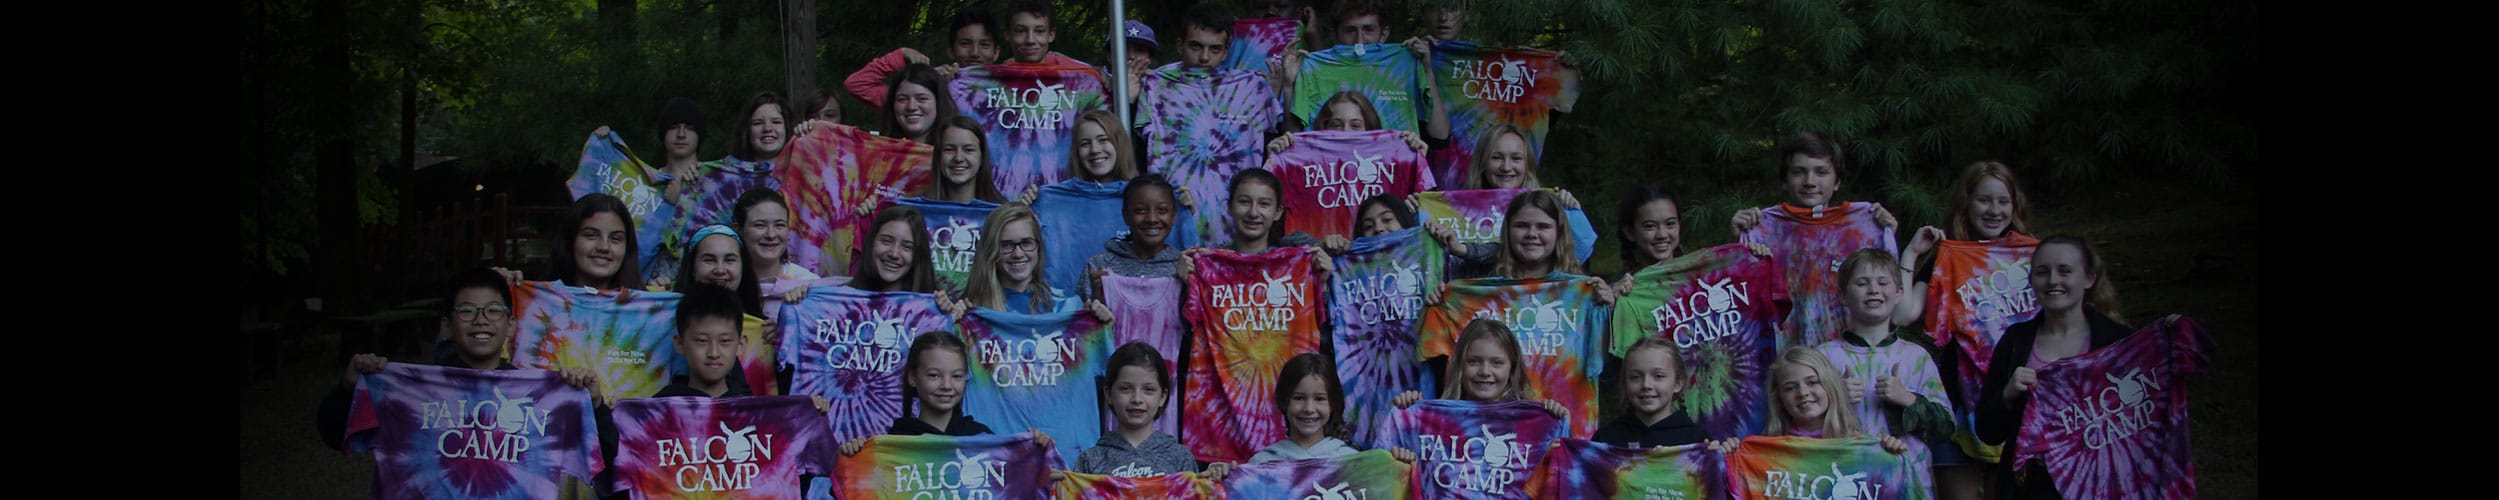 Campers with Falcon Camp t-shirts